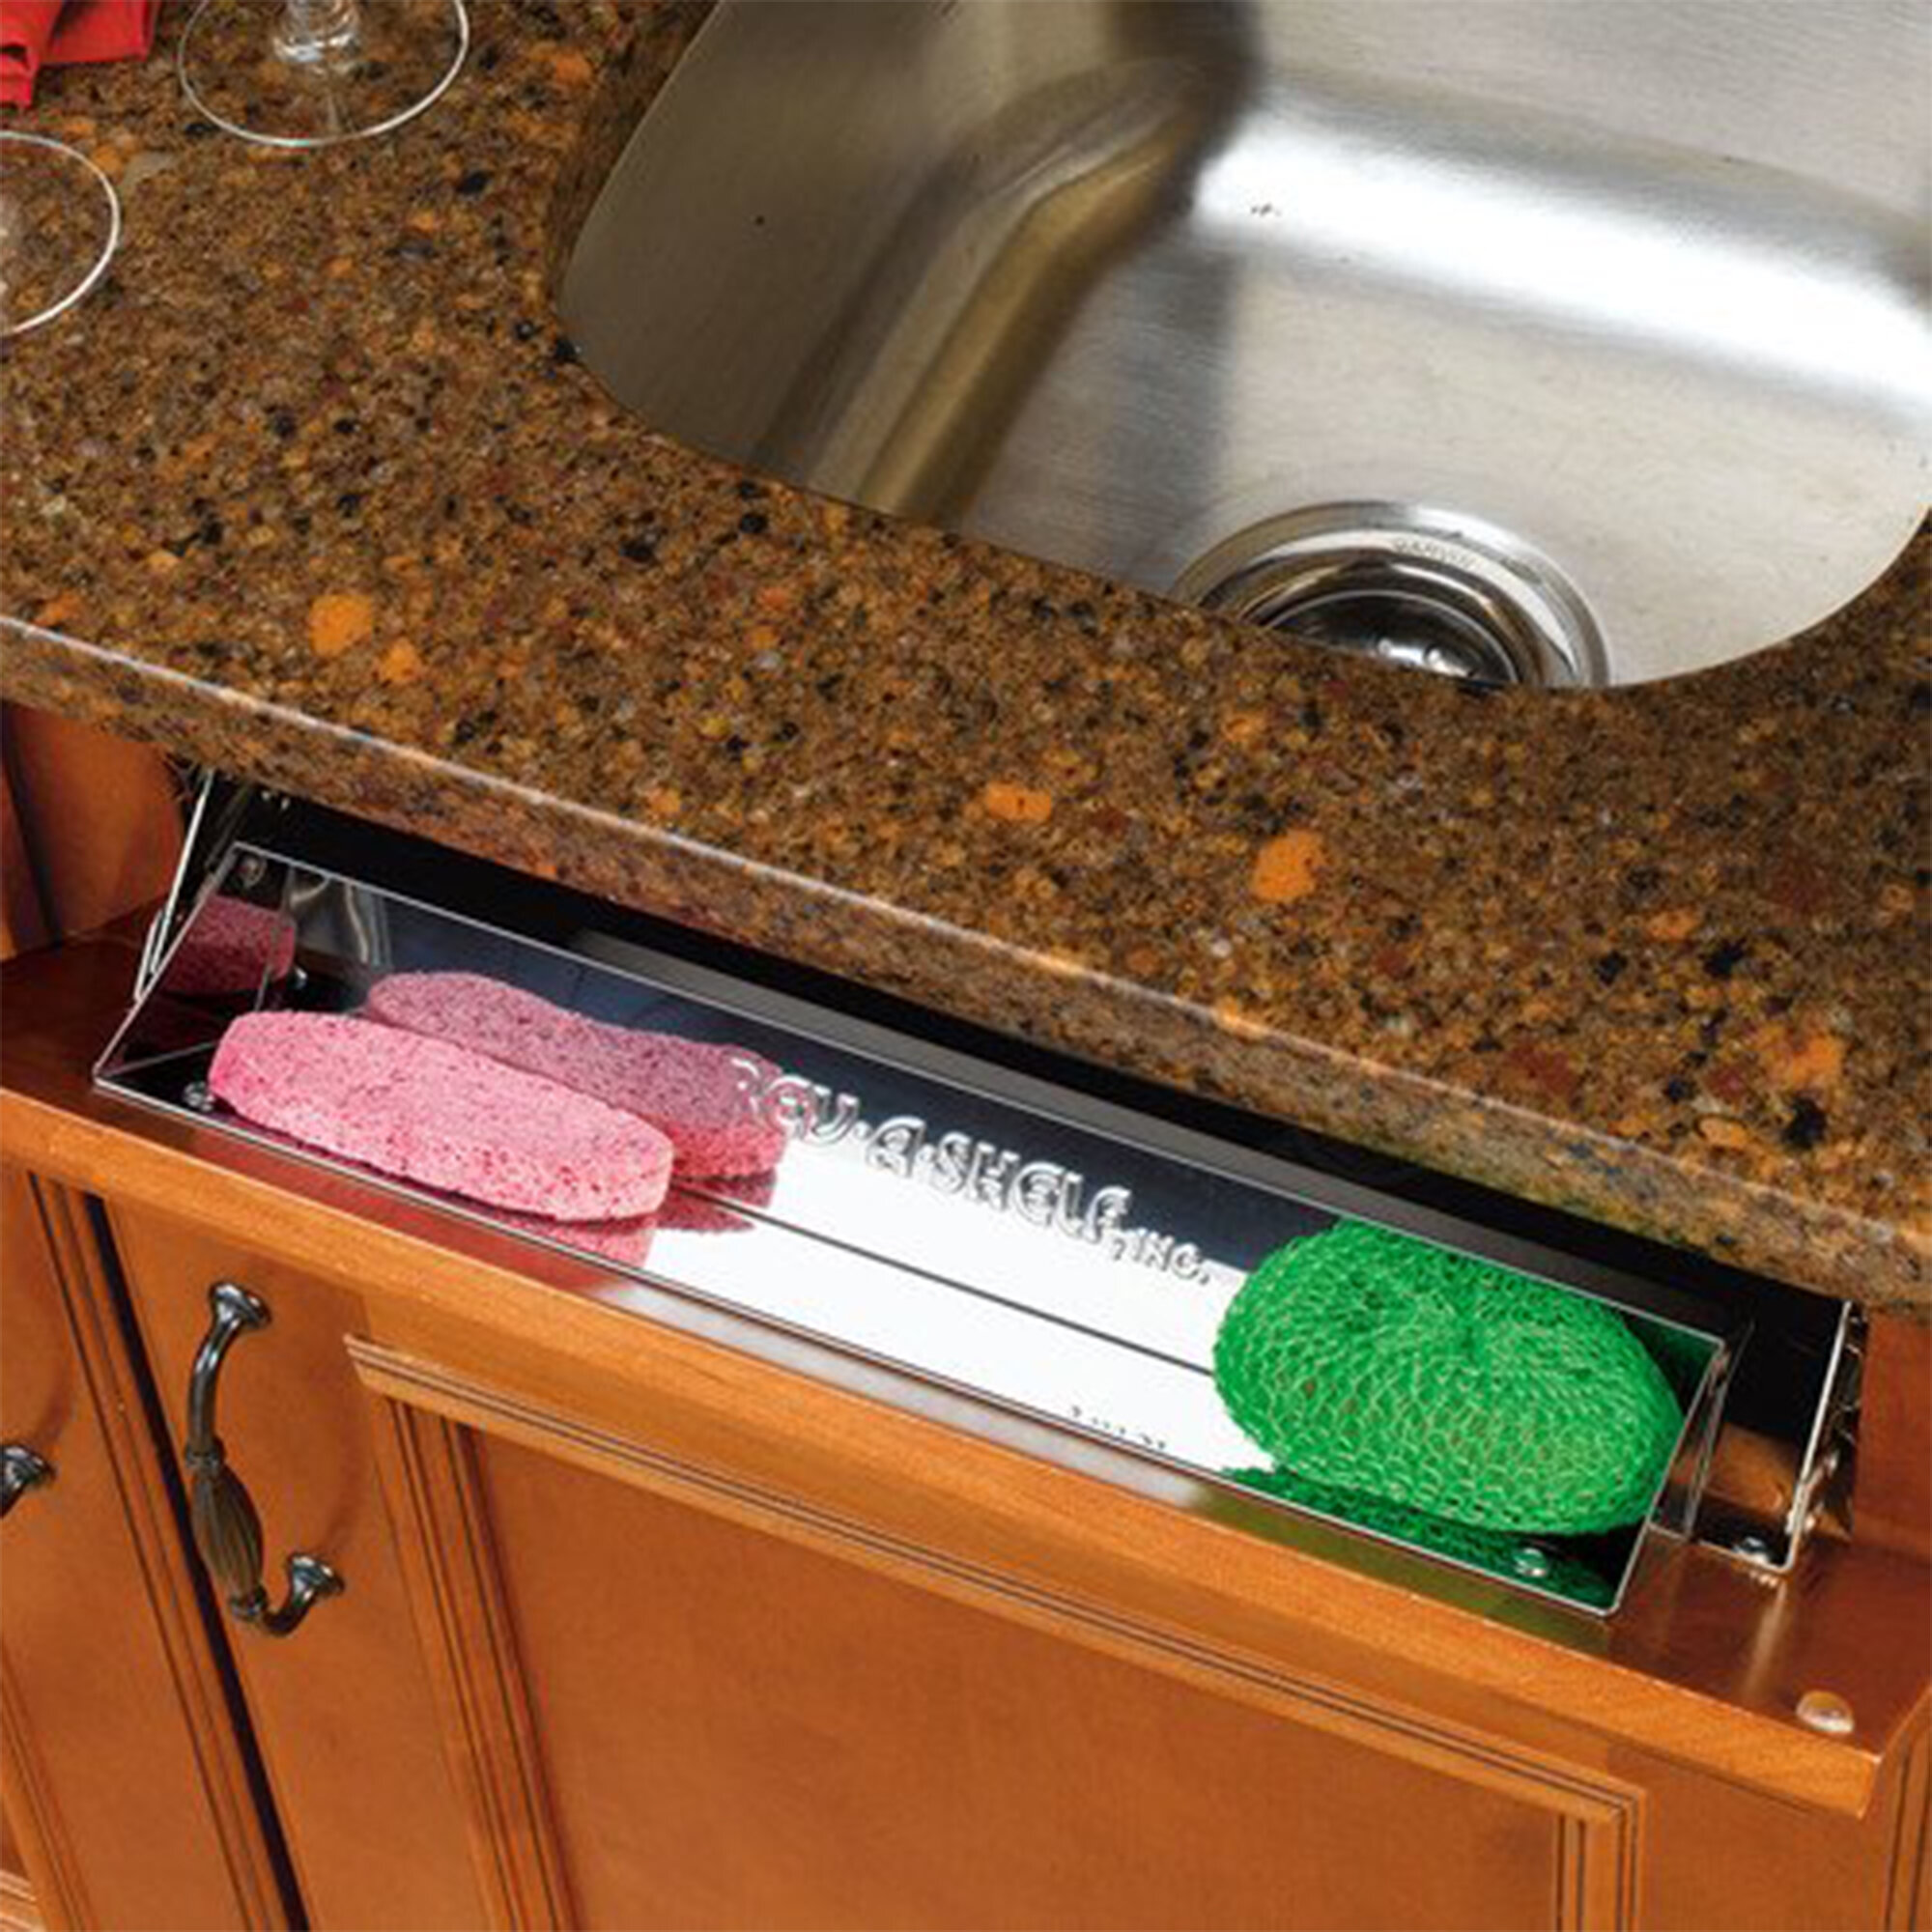 Rev-A-Shelf Stainless Steel Slim Tip-Out Sink Tray Organizer & Reviews